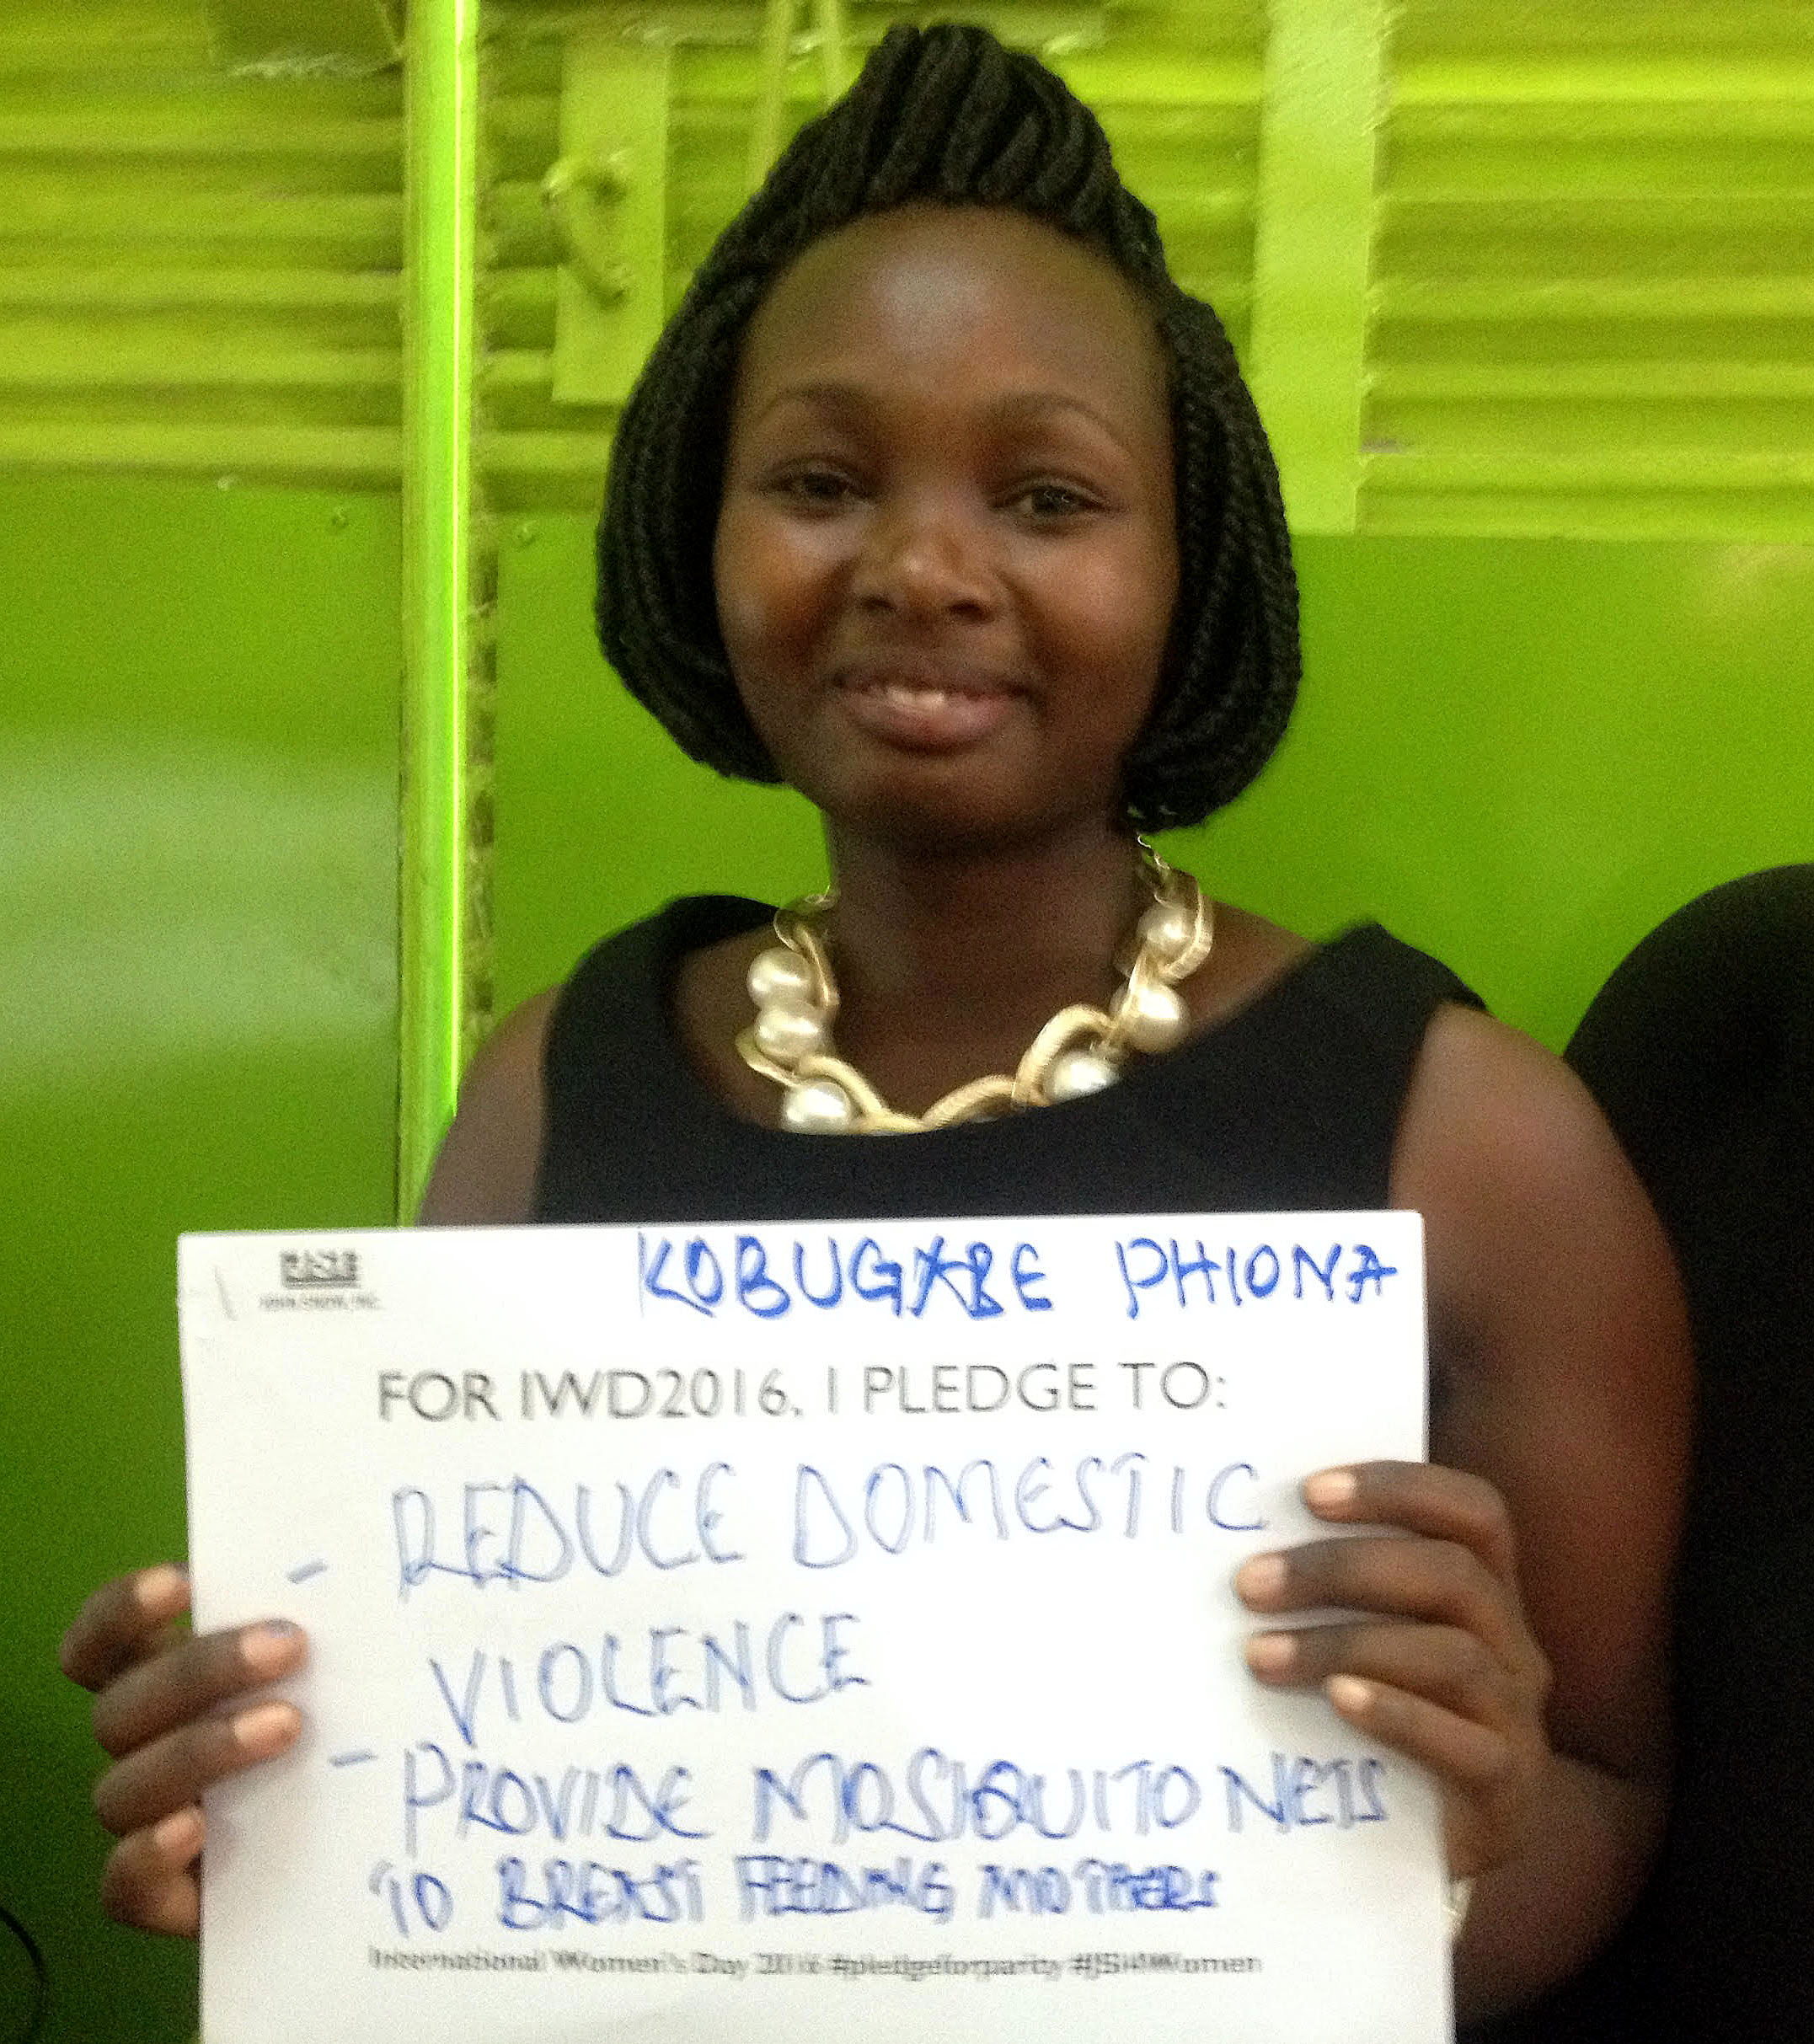 "For IWD ’16, I pledge to reduce domestic violence; provide mosquito nets to breastfeeding mothers"